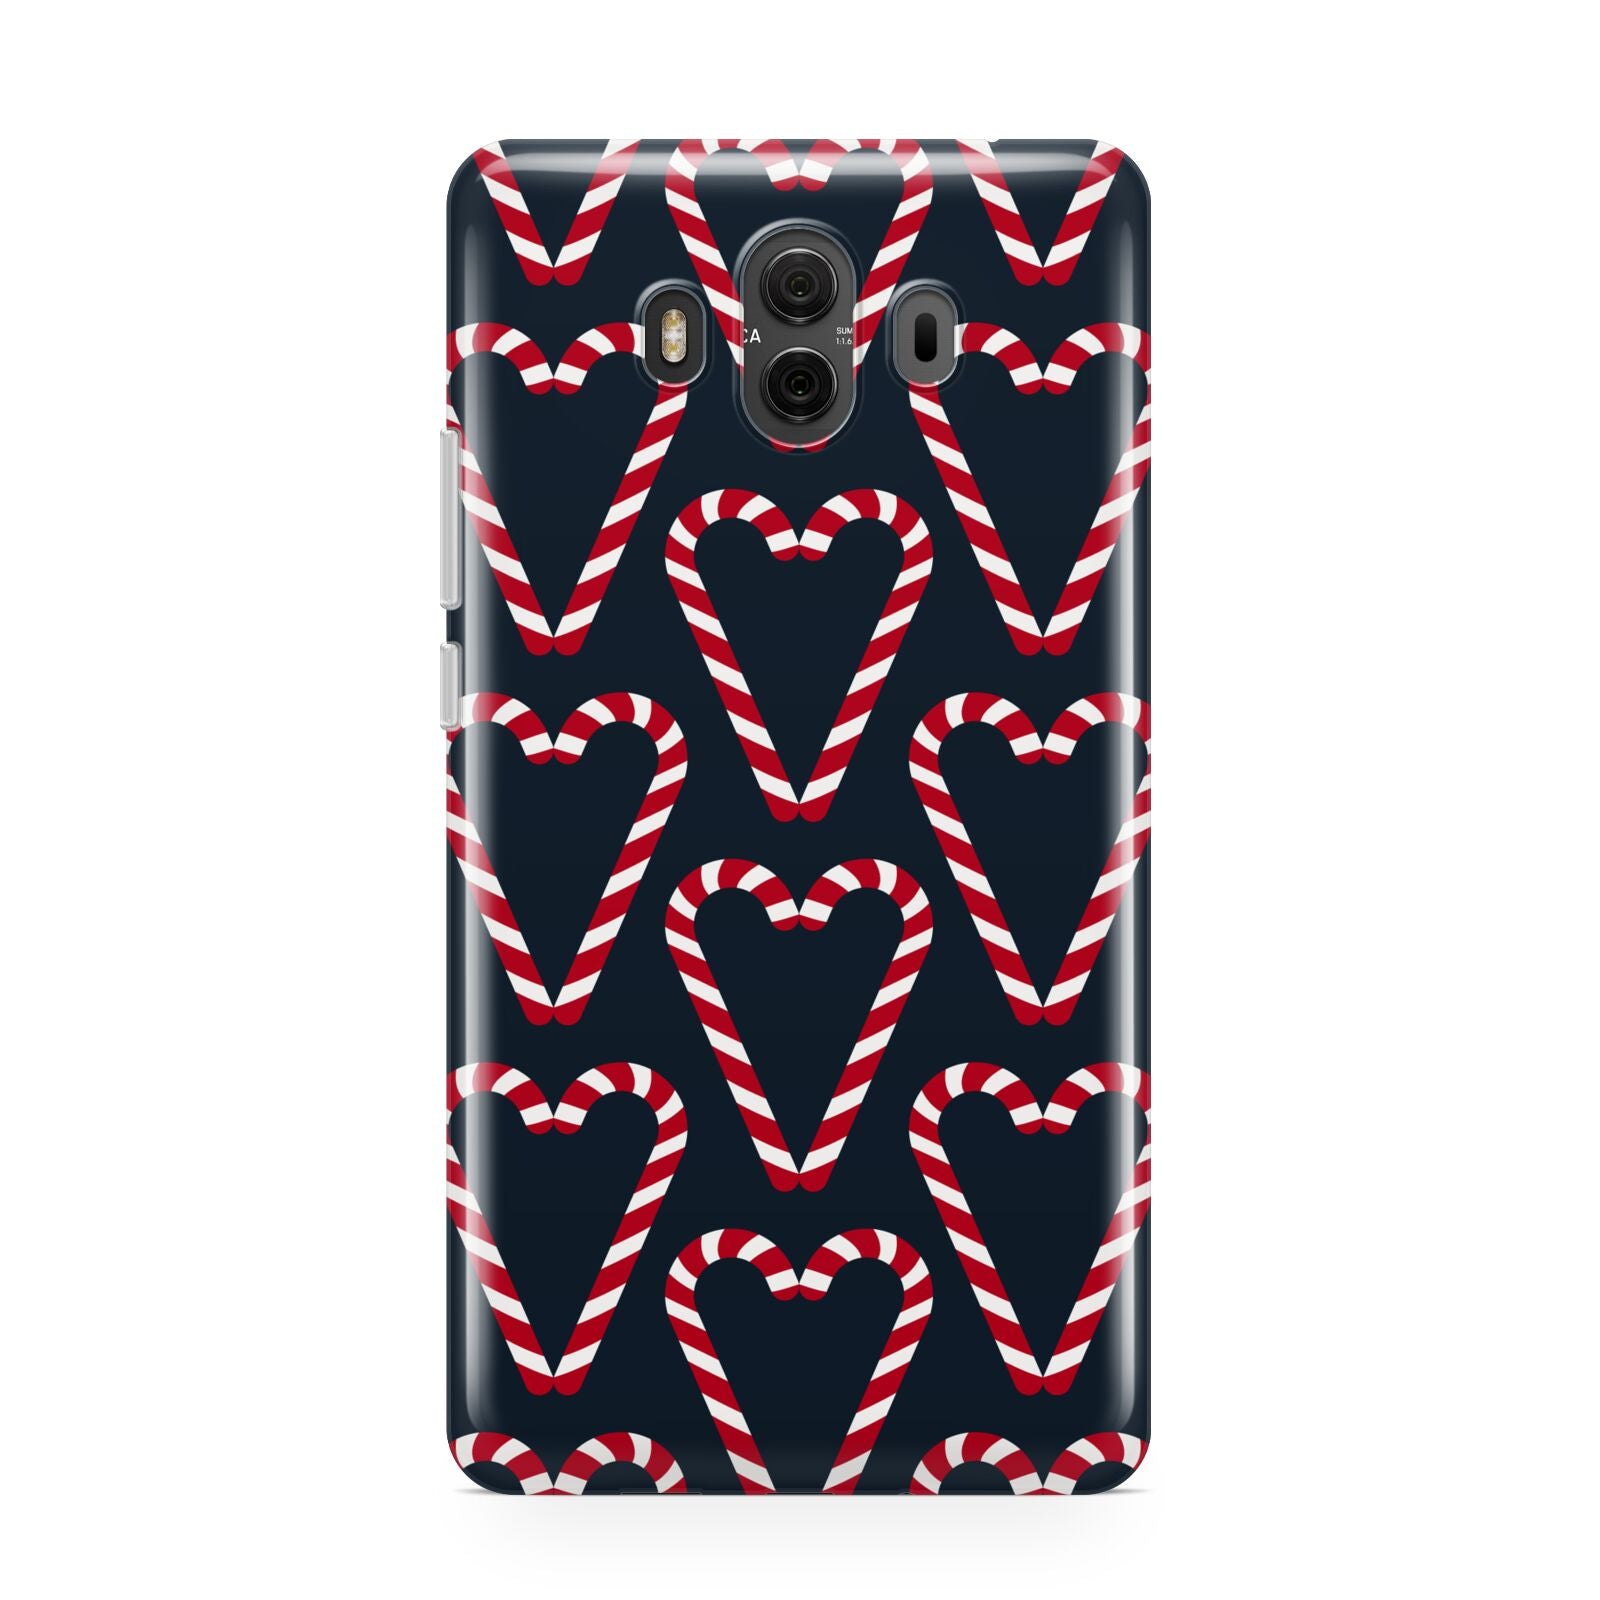 Candy Cane Pattern Huawei Mate 10 Protective Phone Case